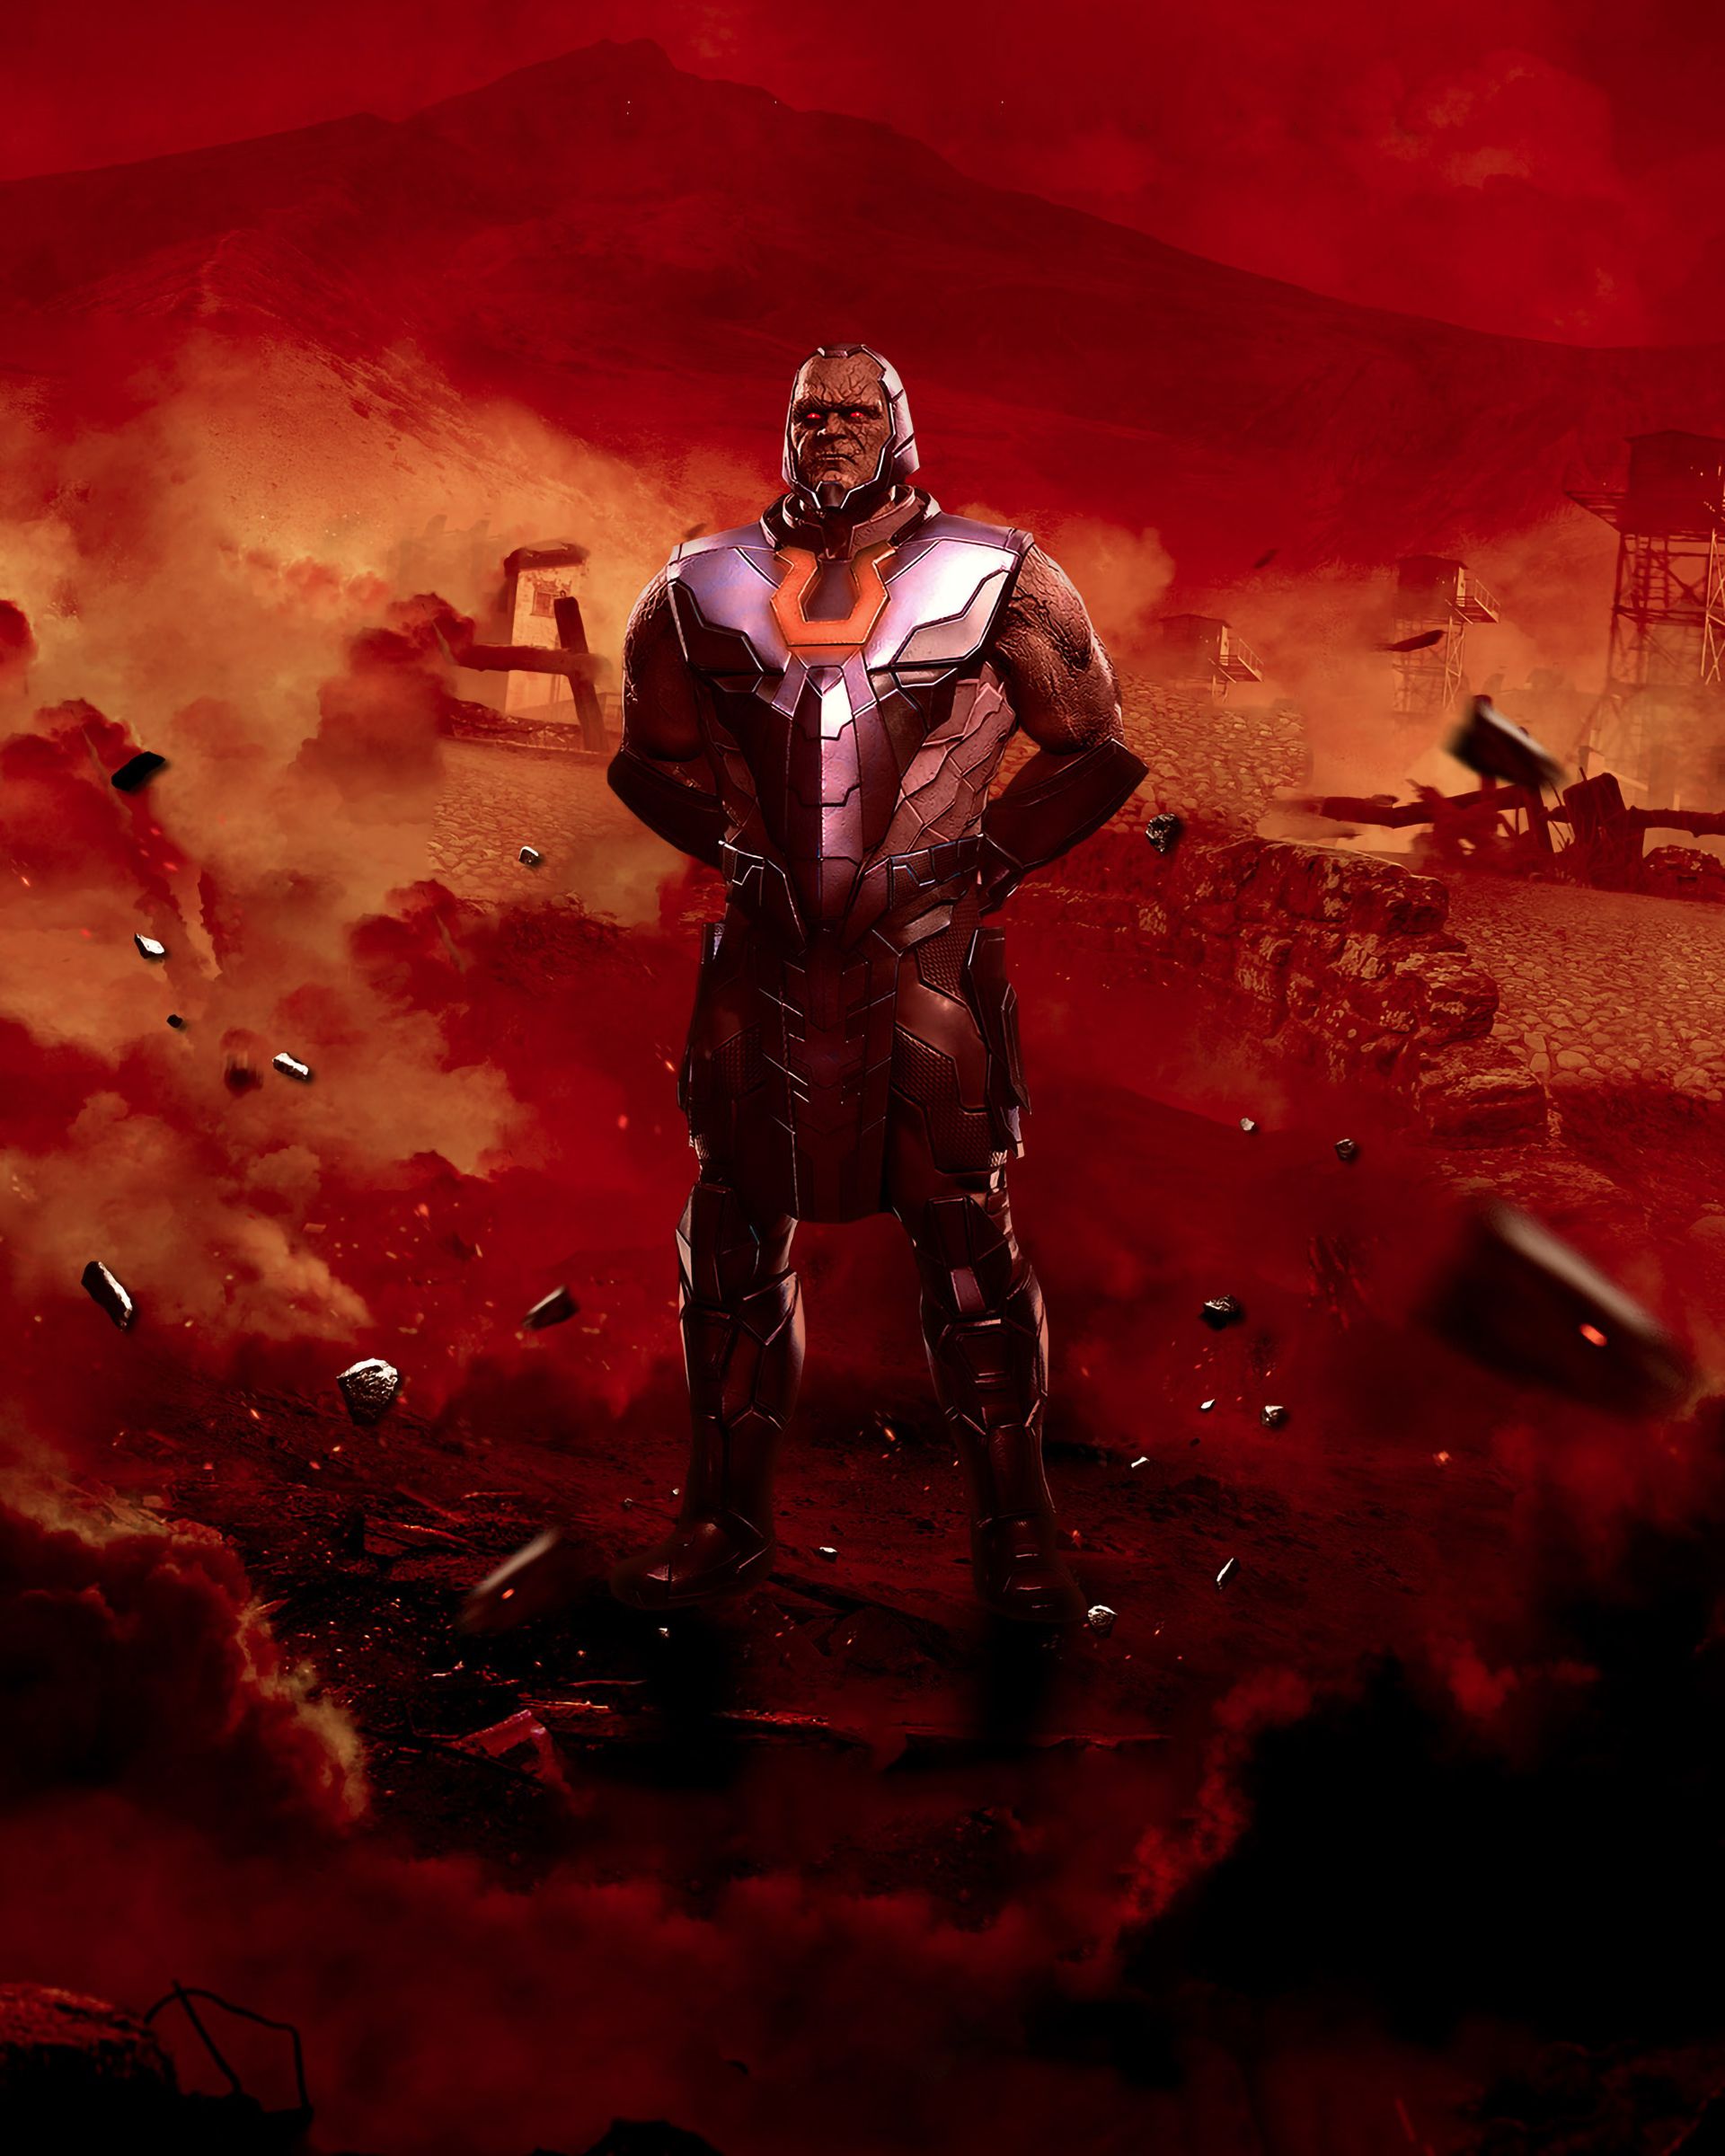 Darkseid DC Justice League Snyder Cut Art Wallpaper, HD Movies 4K Wallpaper, Image, Photo and Background